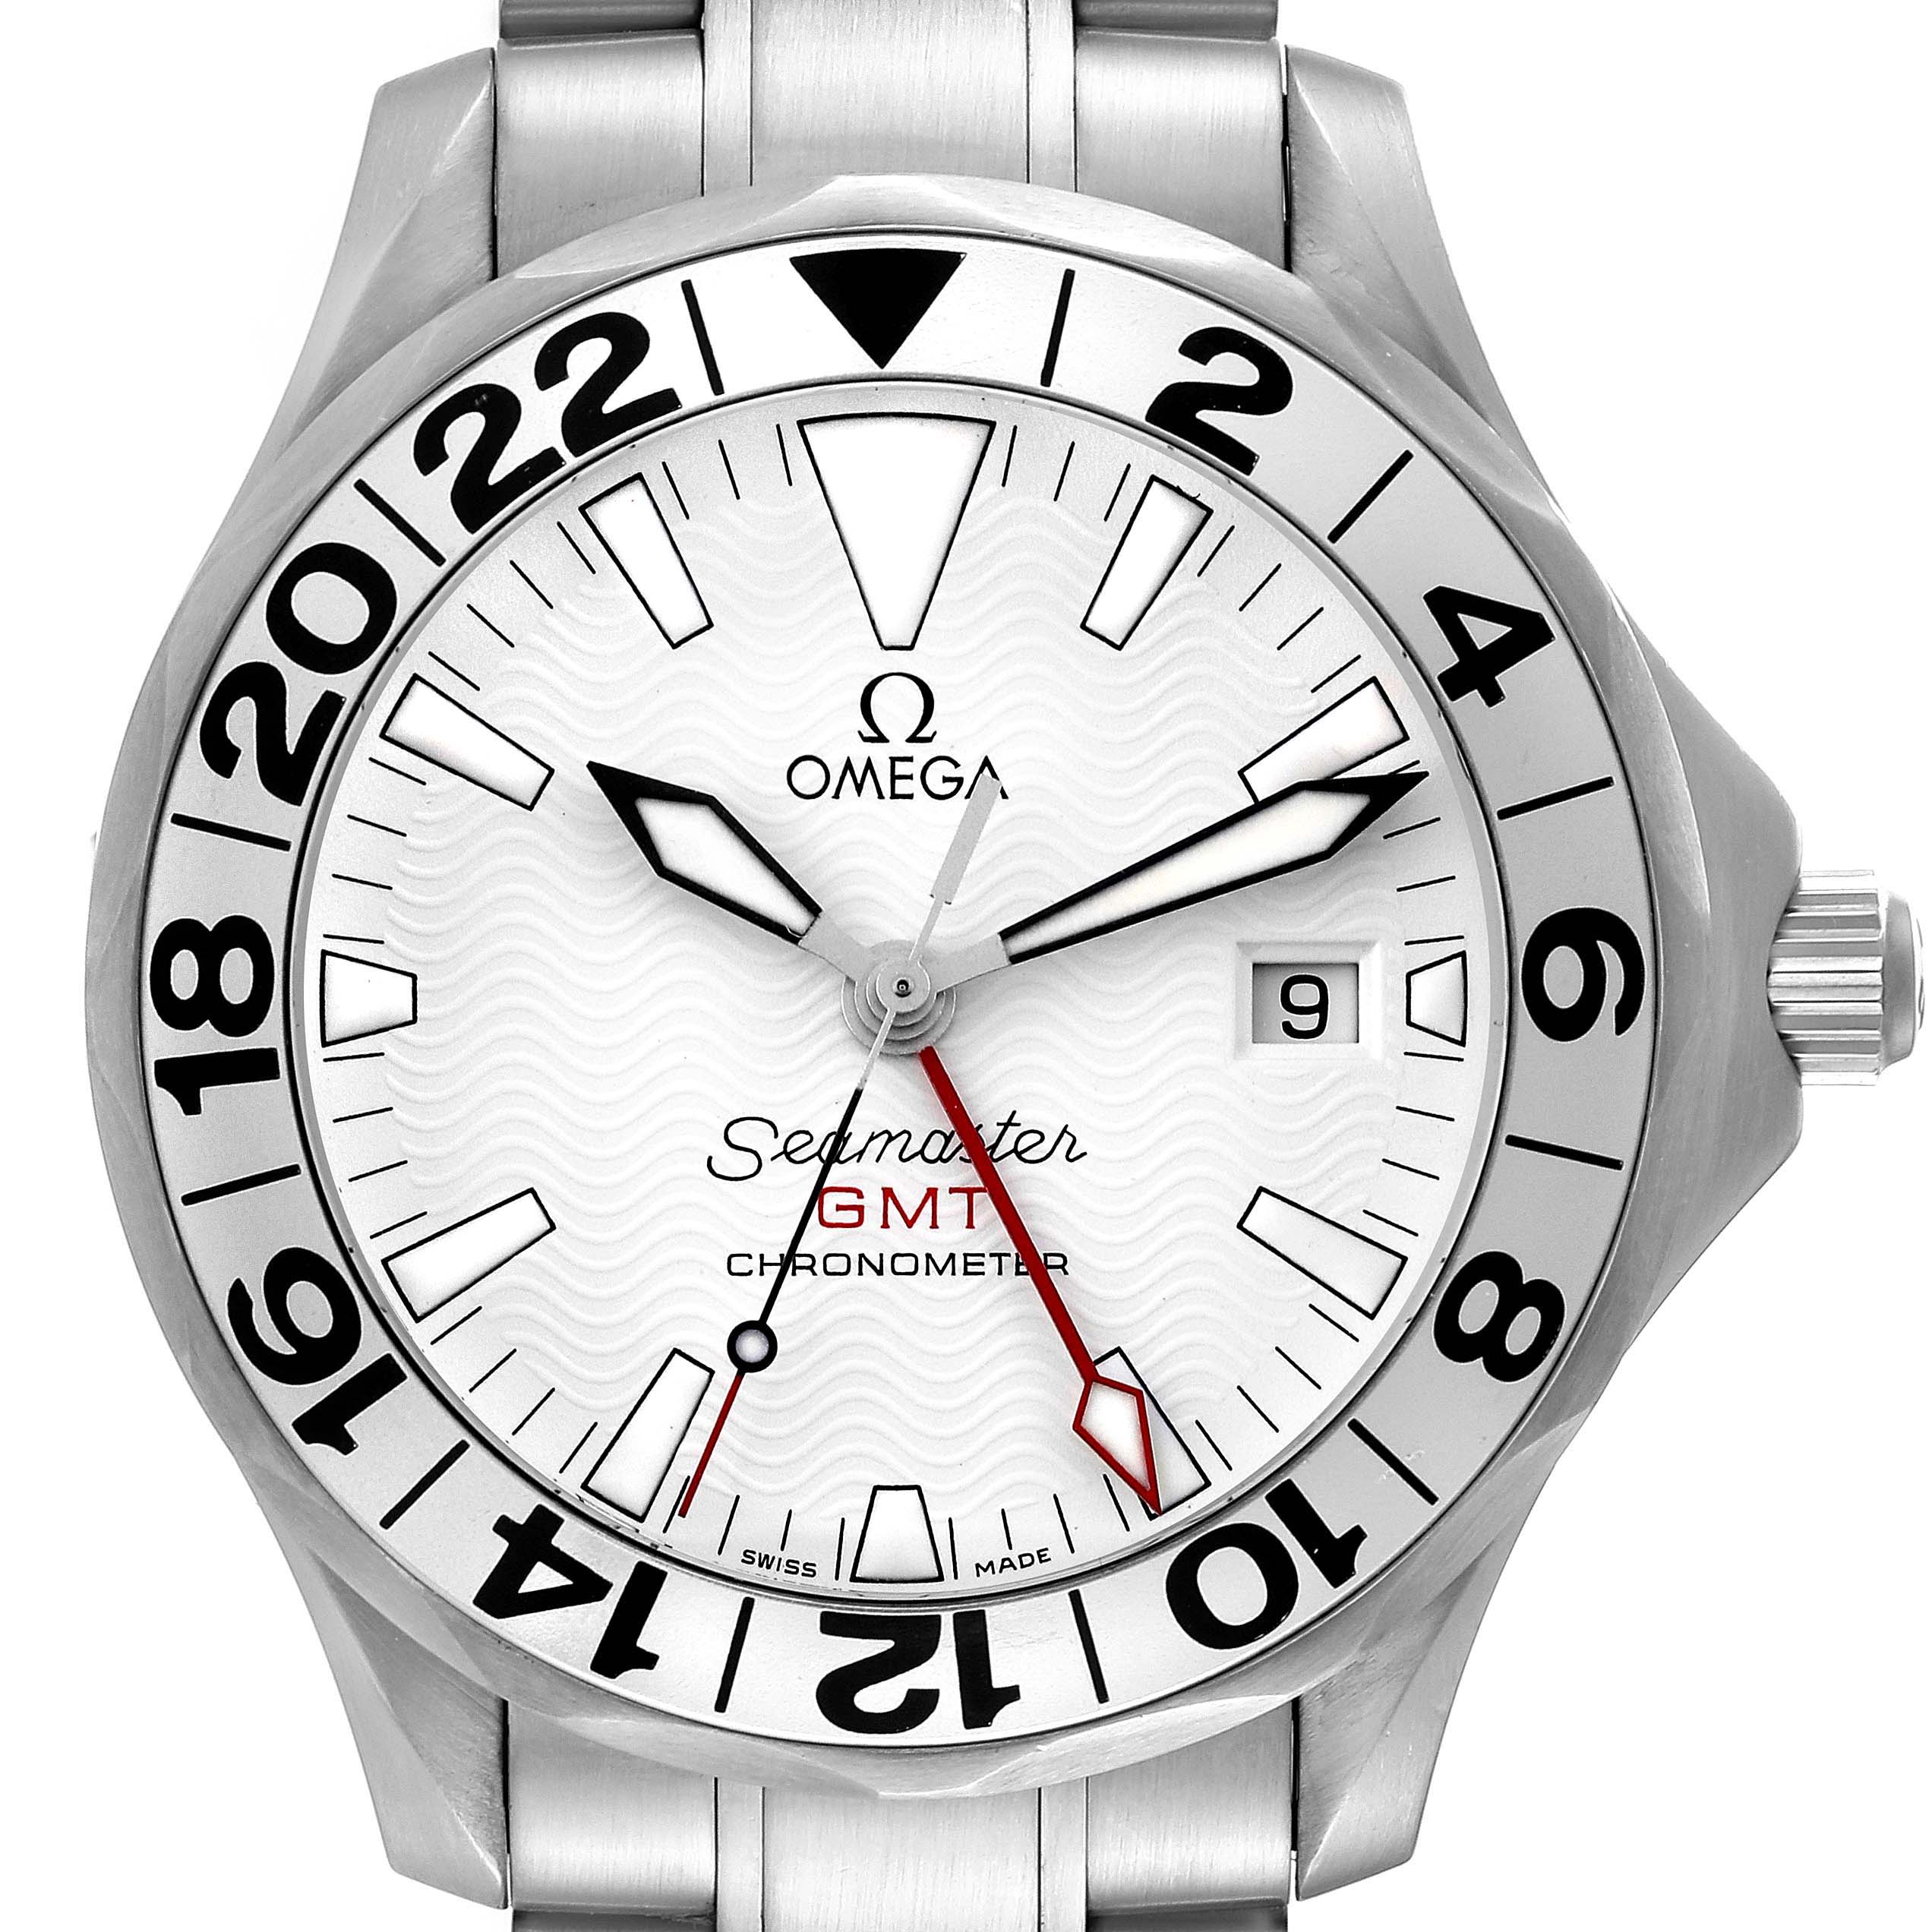 omega-seamaster-diver-300m-gmt-great-white-dial-mens-watch-25382000-50901_c9965.jpg